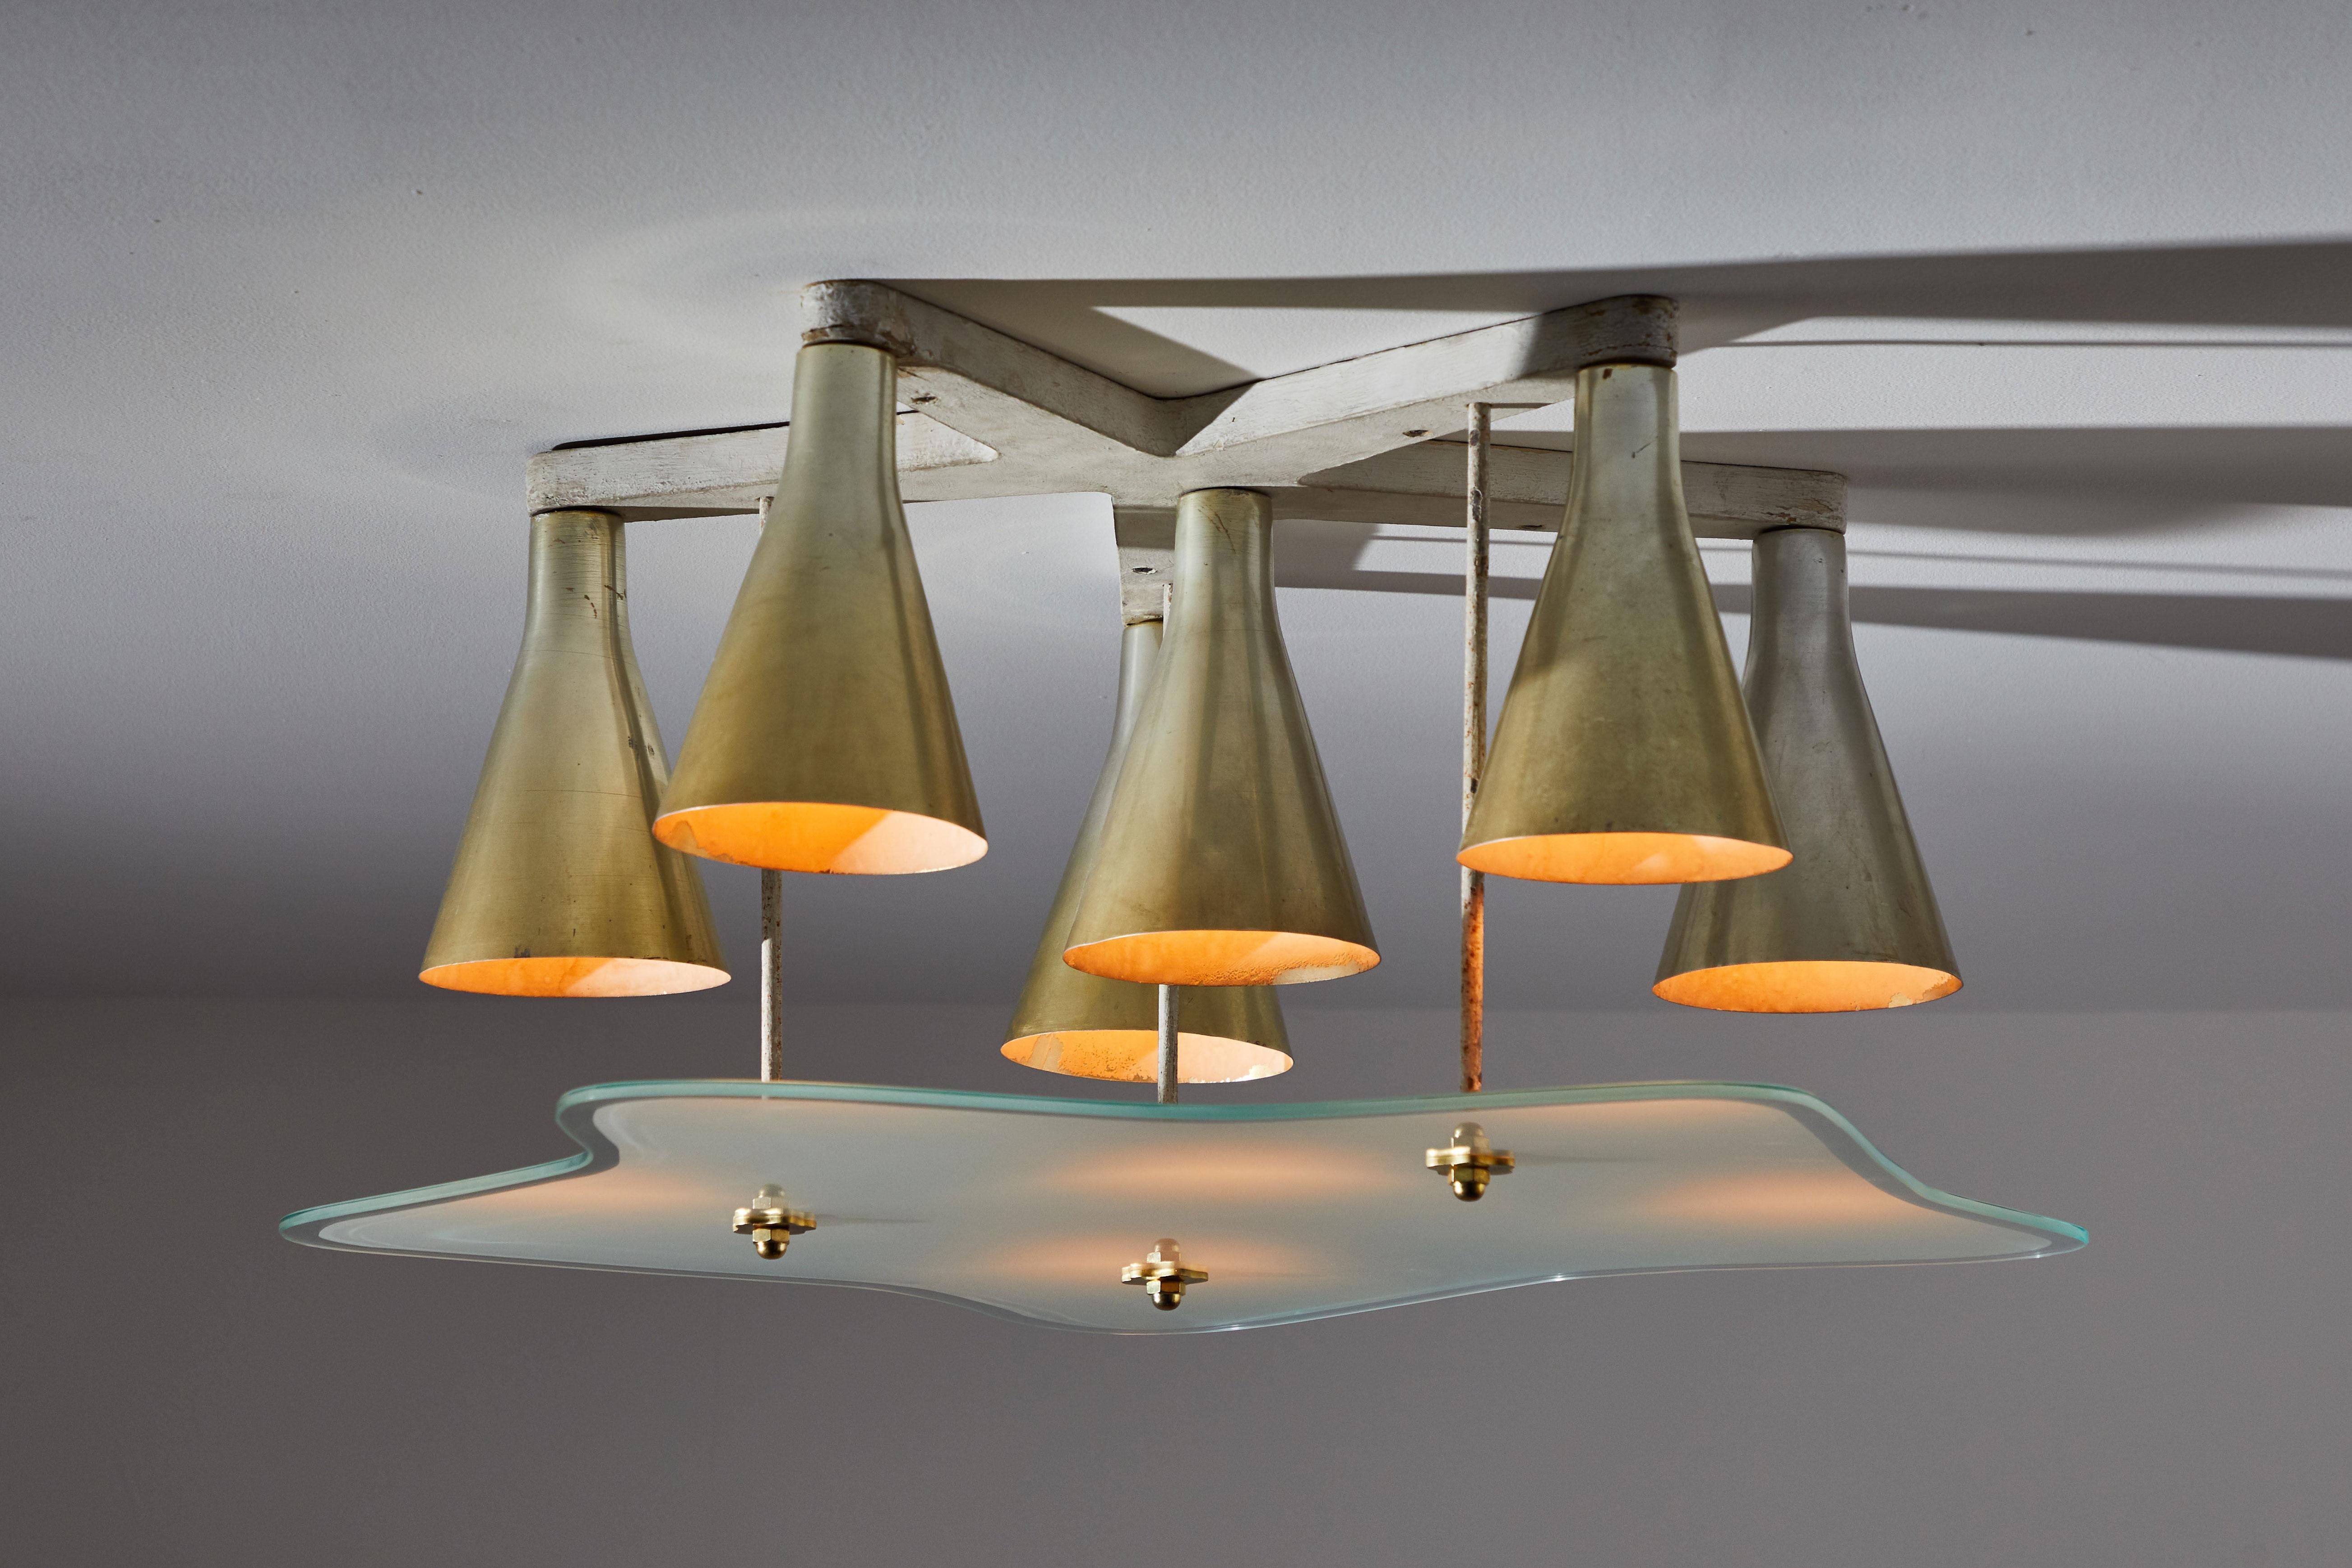 Ceiling light by Giuseppe Ostuni. Designed and manufactured in Italy, circa 1950s. Lacquered wood structure, brass reflectors and sanded glass diffuser. Rewired for US junction boxes. Takes nine E26 European candelabra 25w maximum bulbs. Bulbs